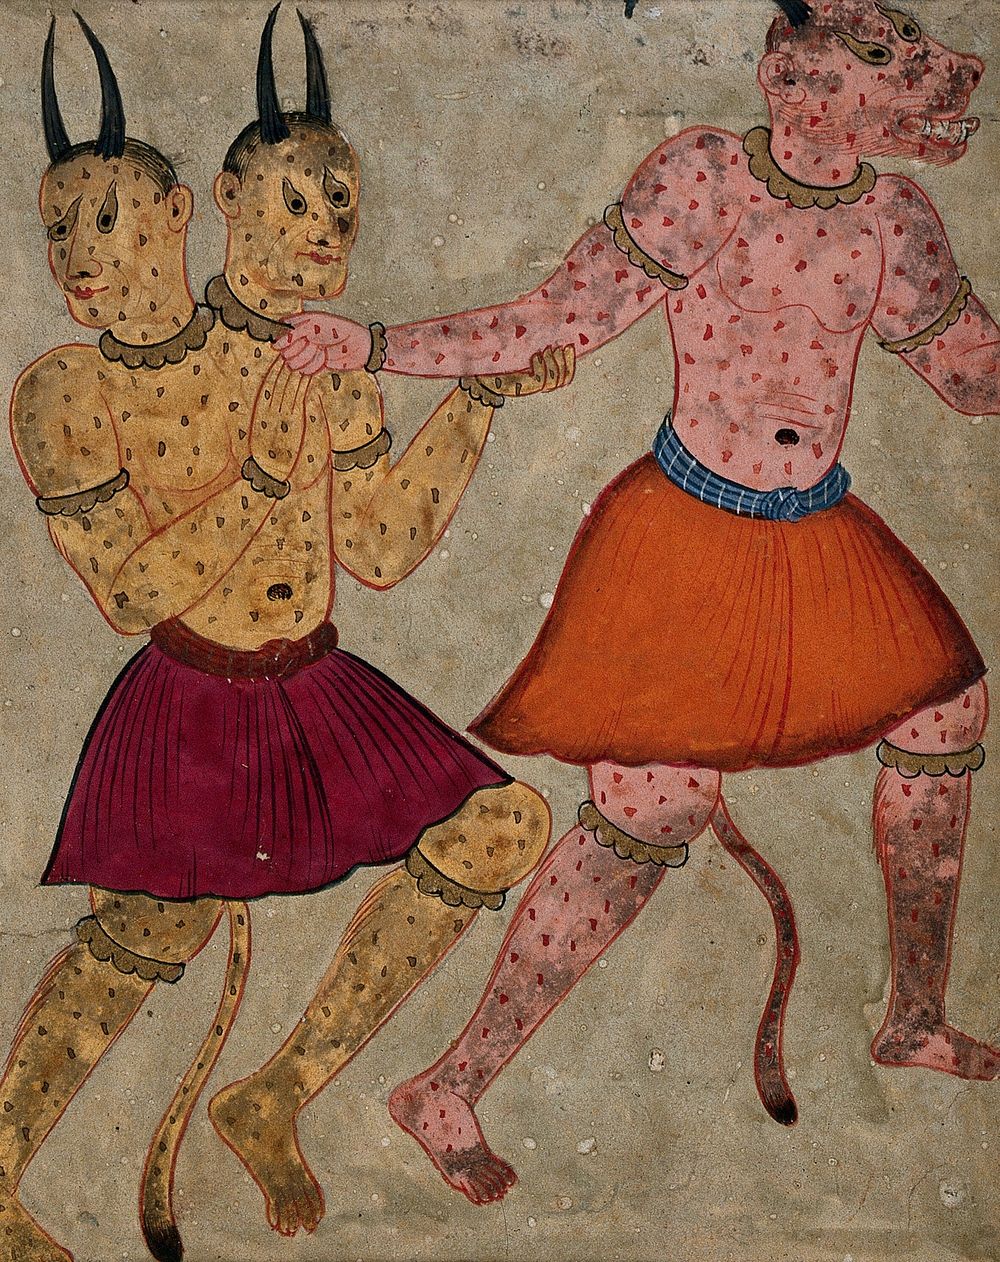 Two spotted divs, one of them with two heads. Gouache painting by a Persian artist, possibly Indian ca. 1650 .